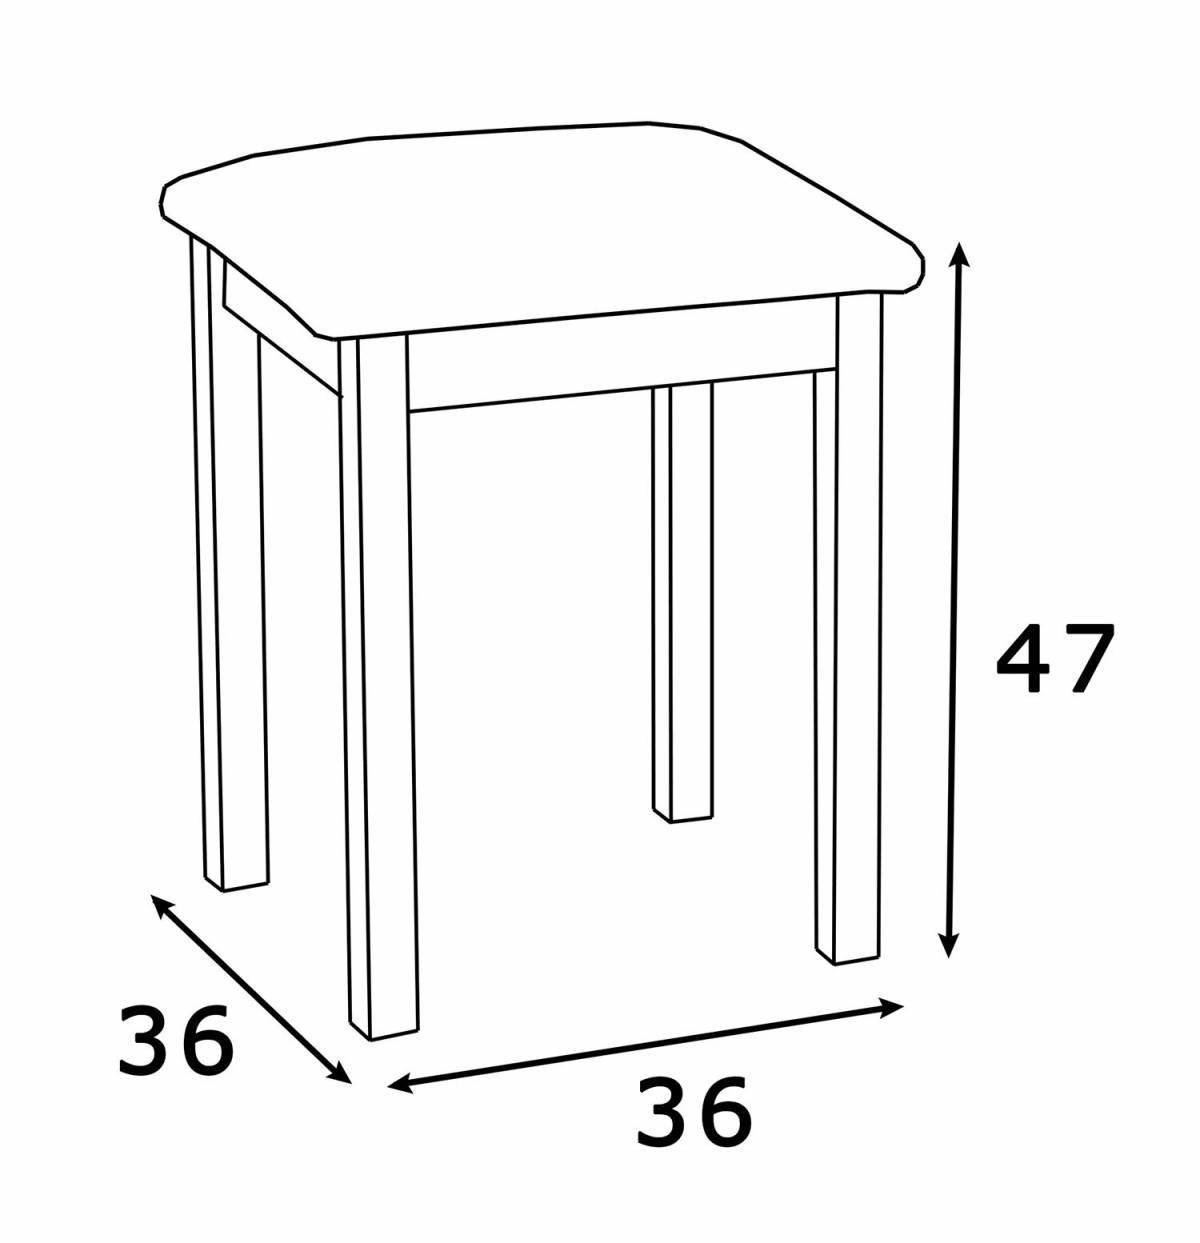 Coloring book shiny stool